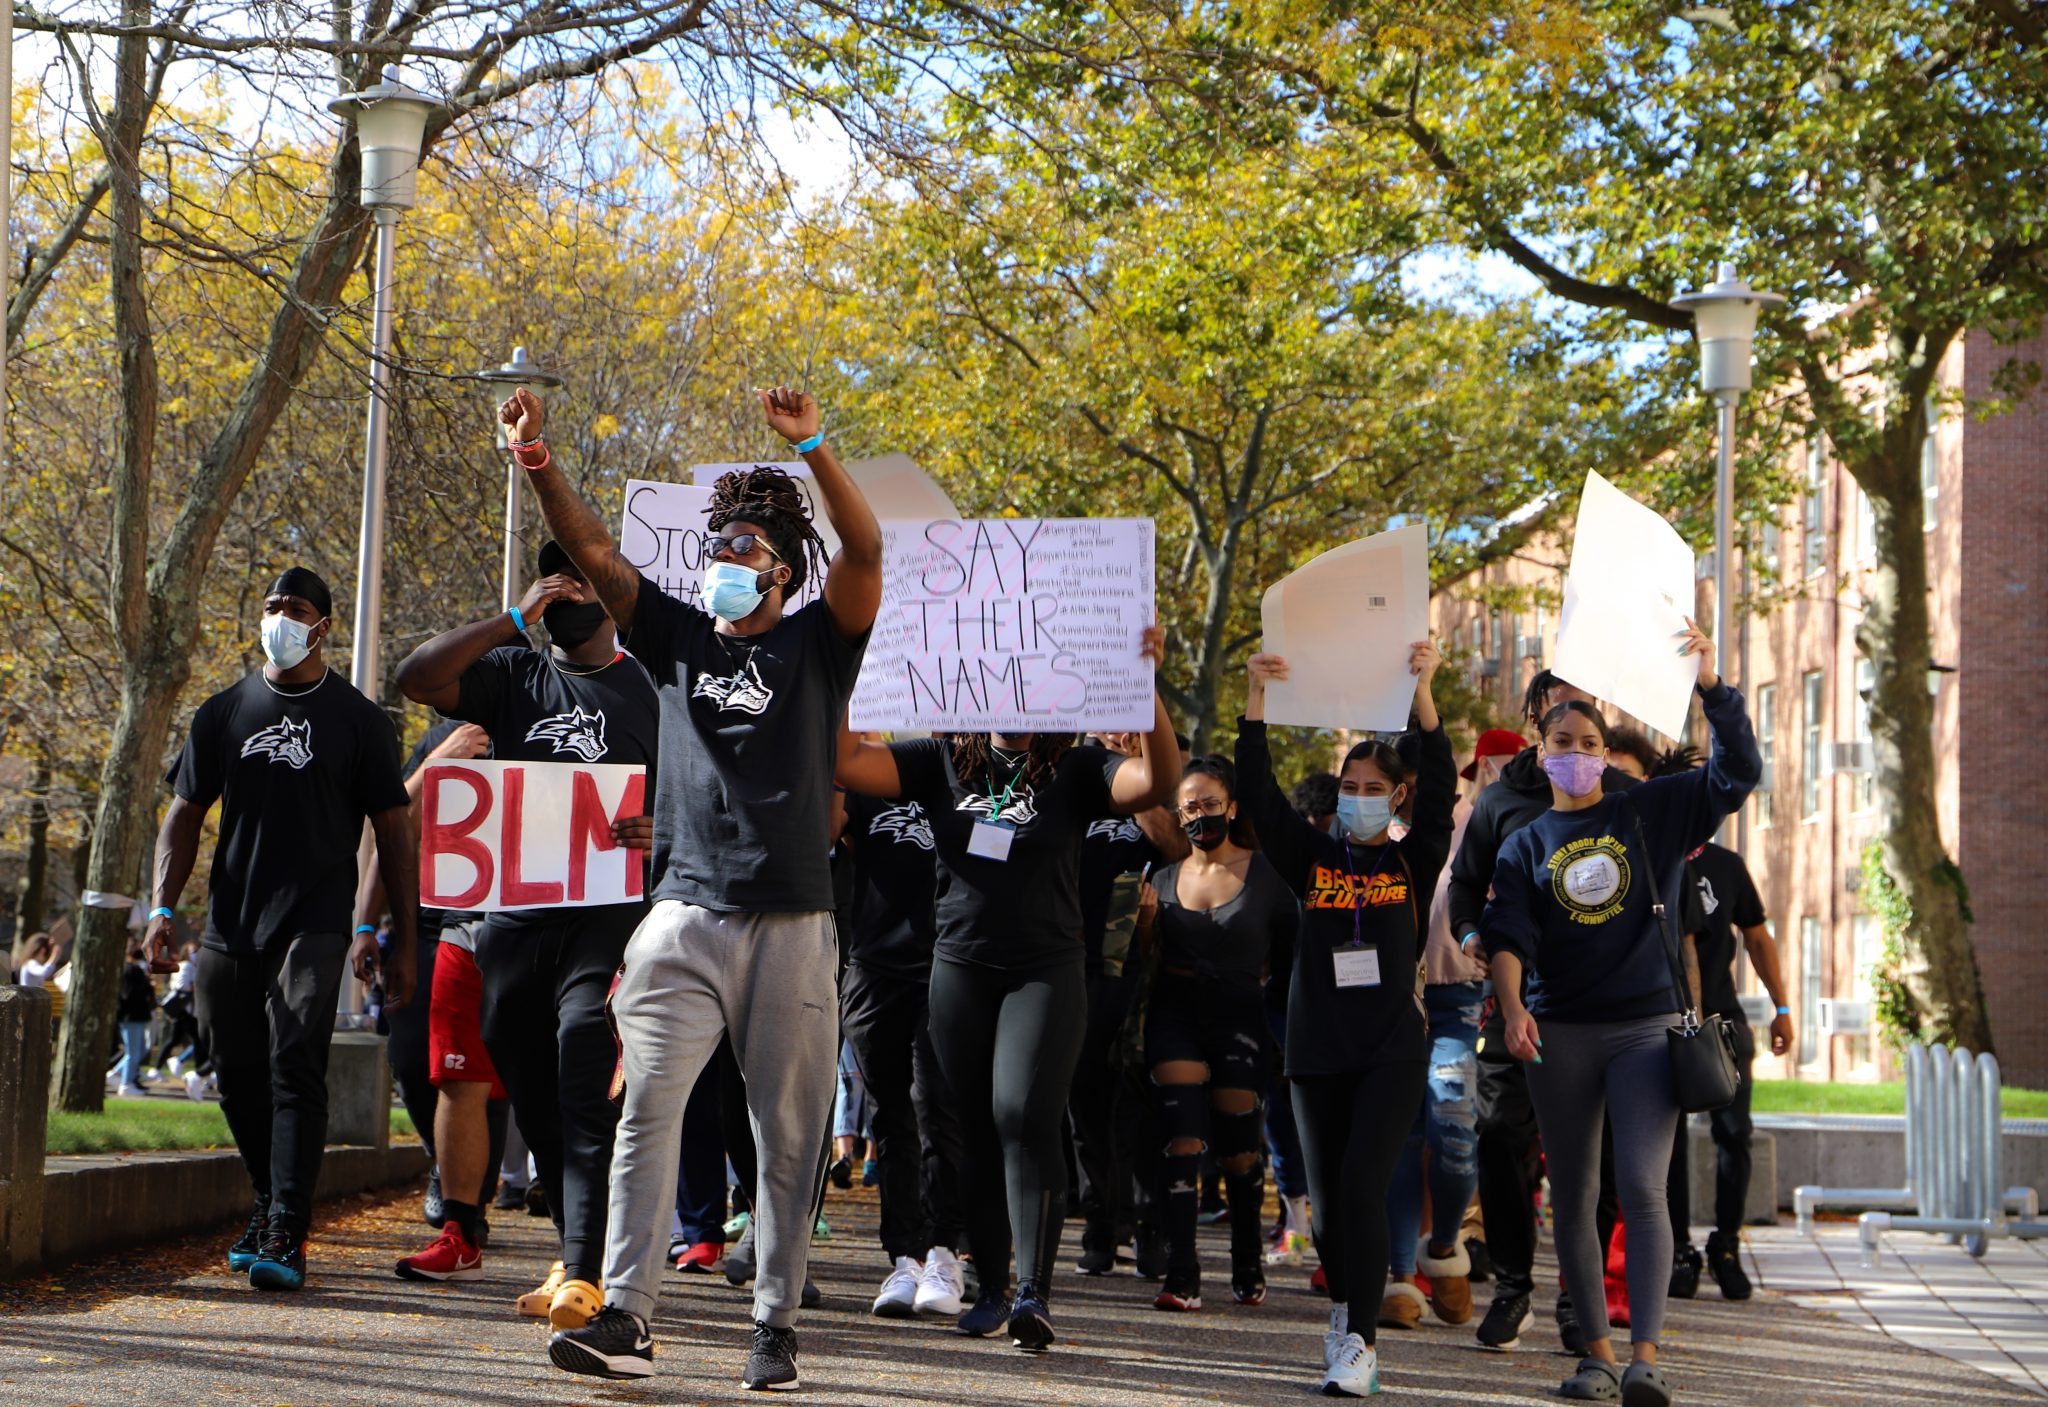 Image of Stony Brook University students during Black Lives Matter protest on October 21, 2020.